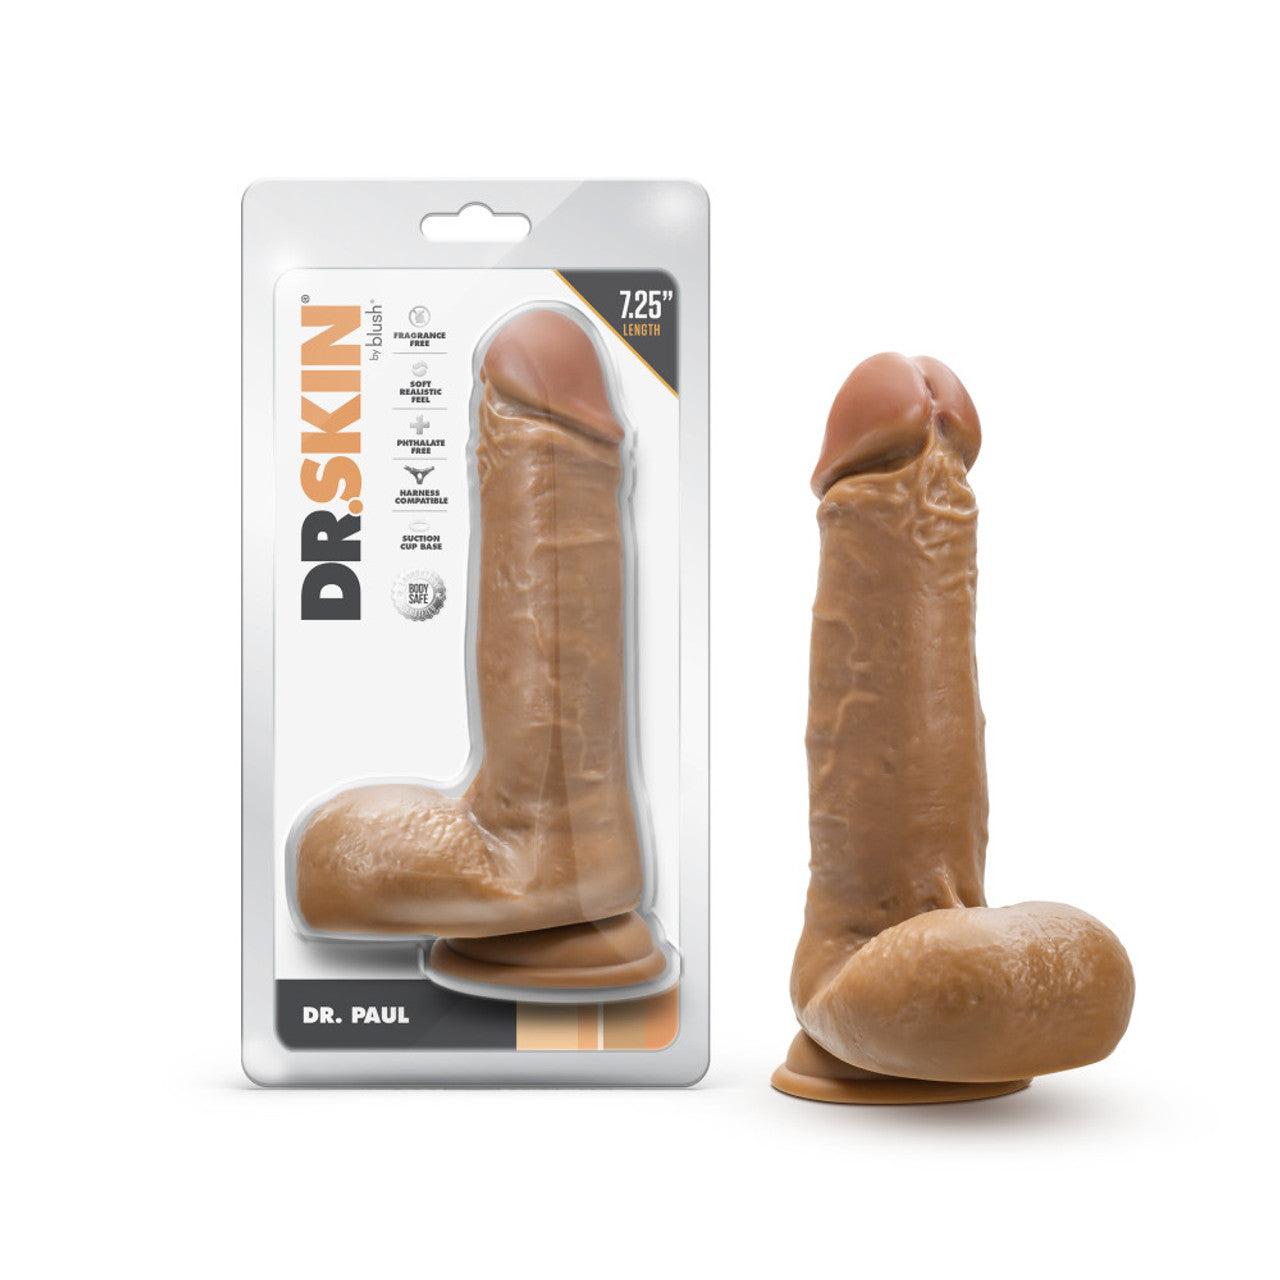 Dr. Skin 7.25 Inch Dildo With Balls - Tan - Thorn & Feather